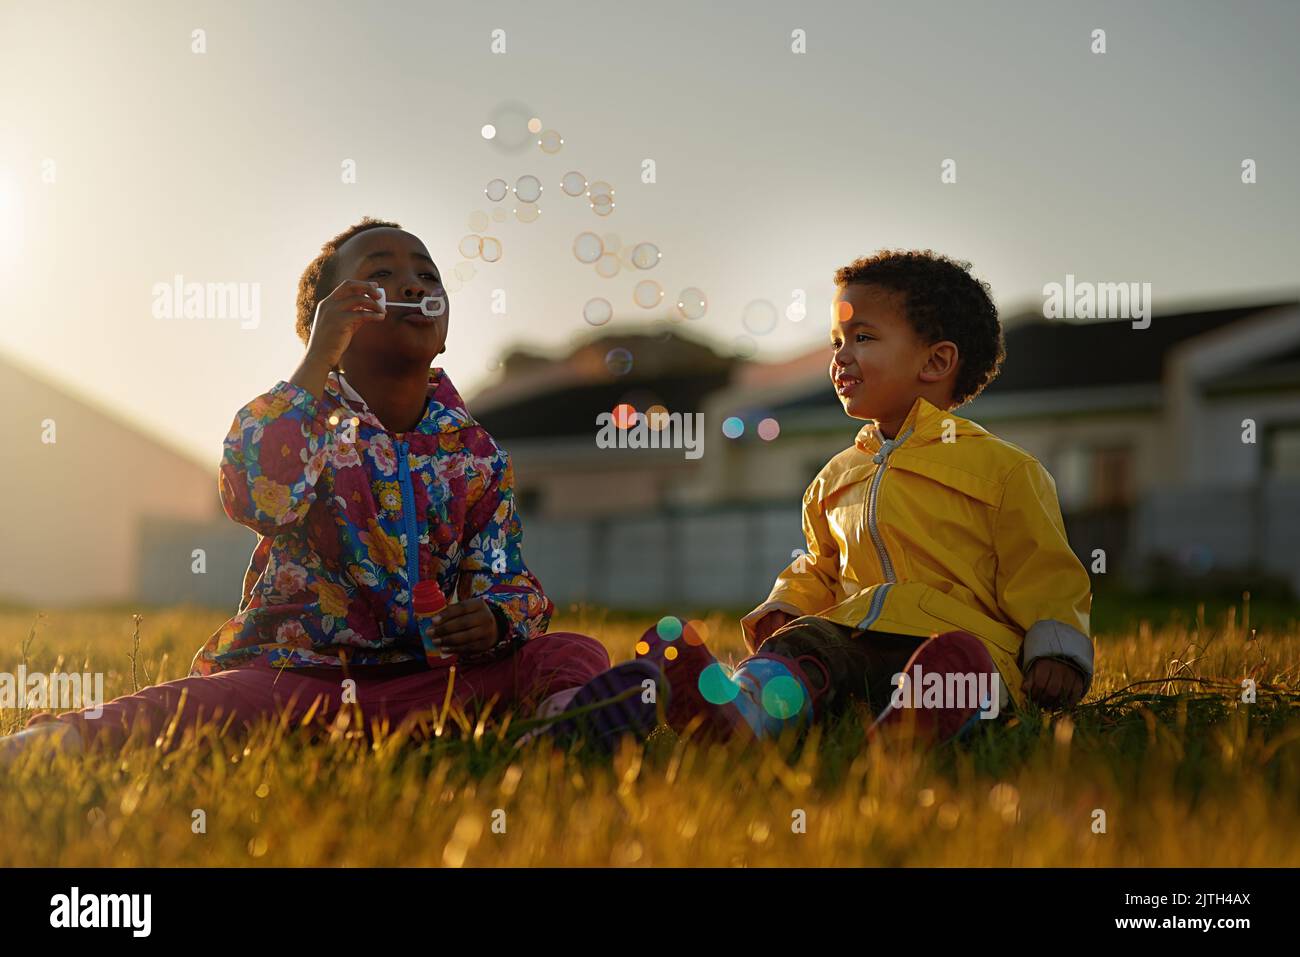 Enjoying a bit of bubble fun together. a brother and sister sitting on the ground outside blowing bubbles. Stock Photo